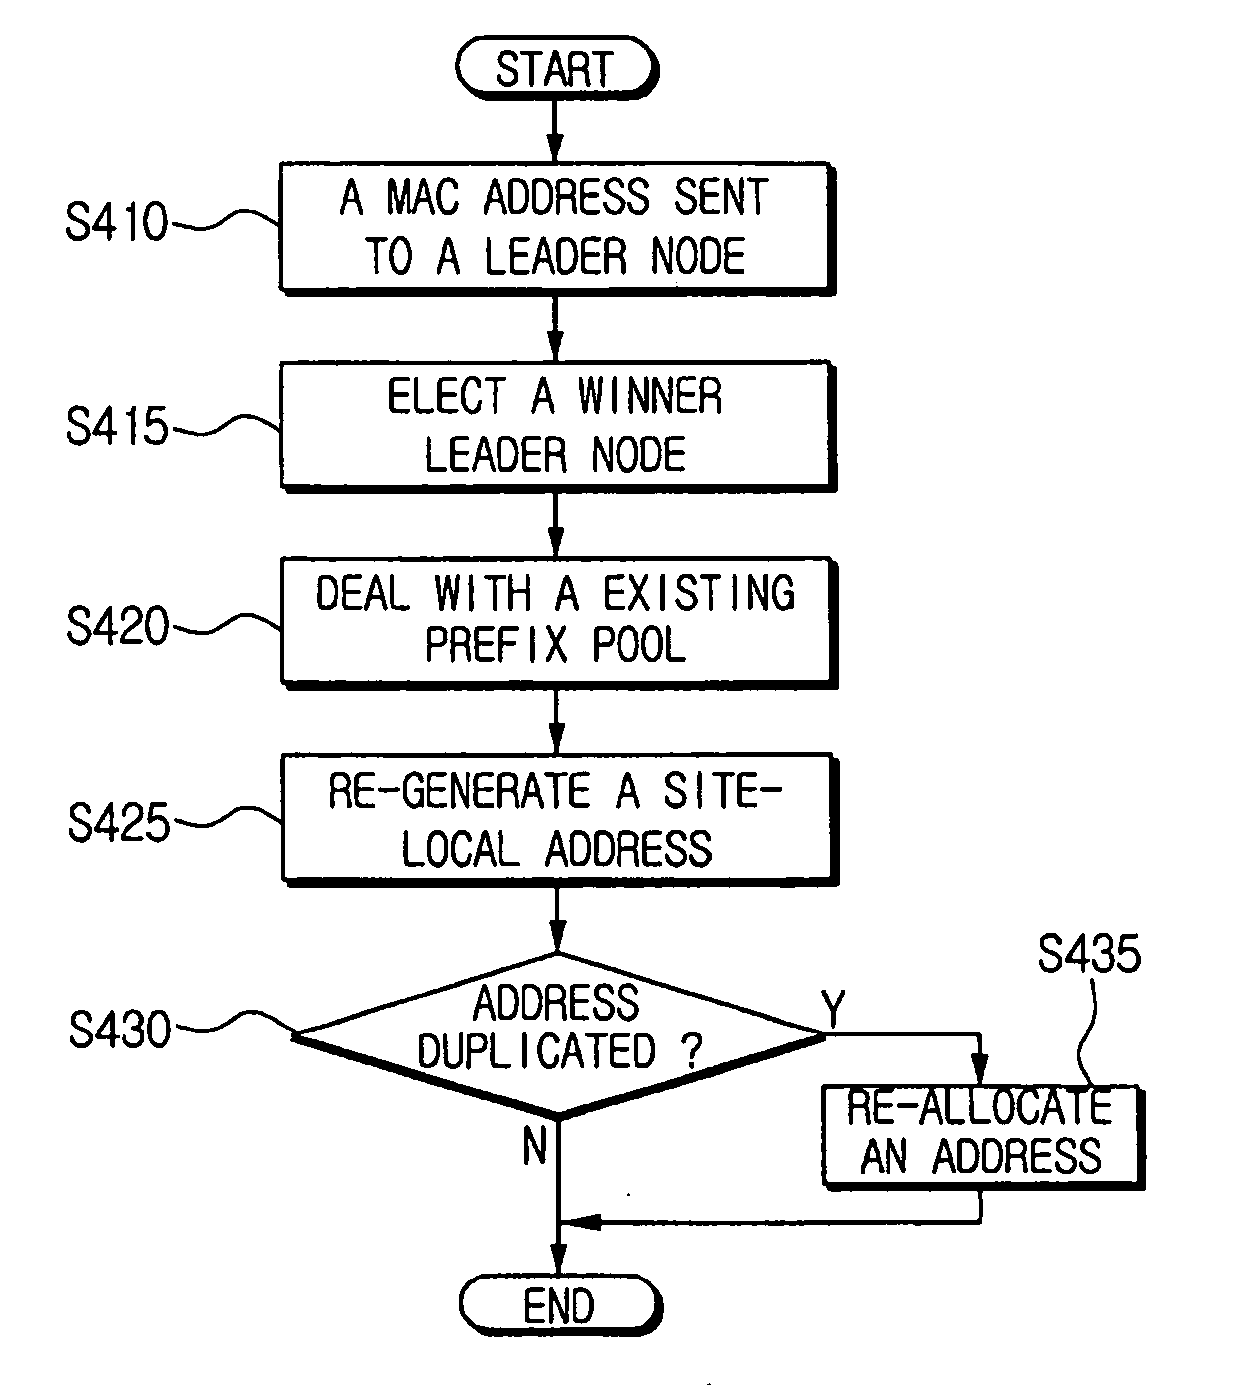 Address allocation method using site-local prefix pools in mobile ad-hoc networks